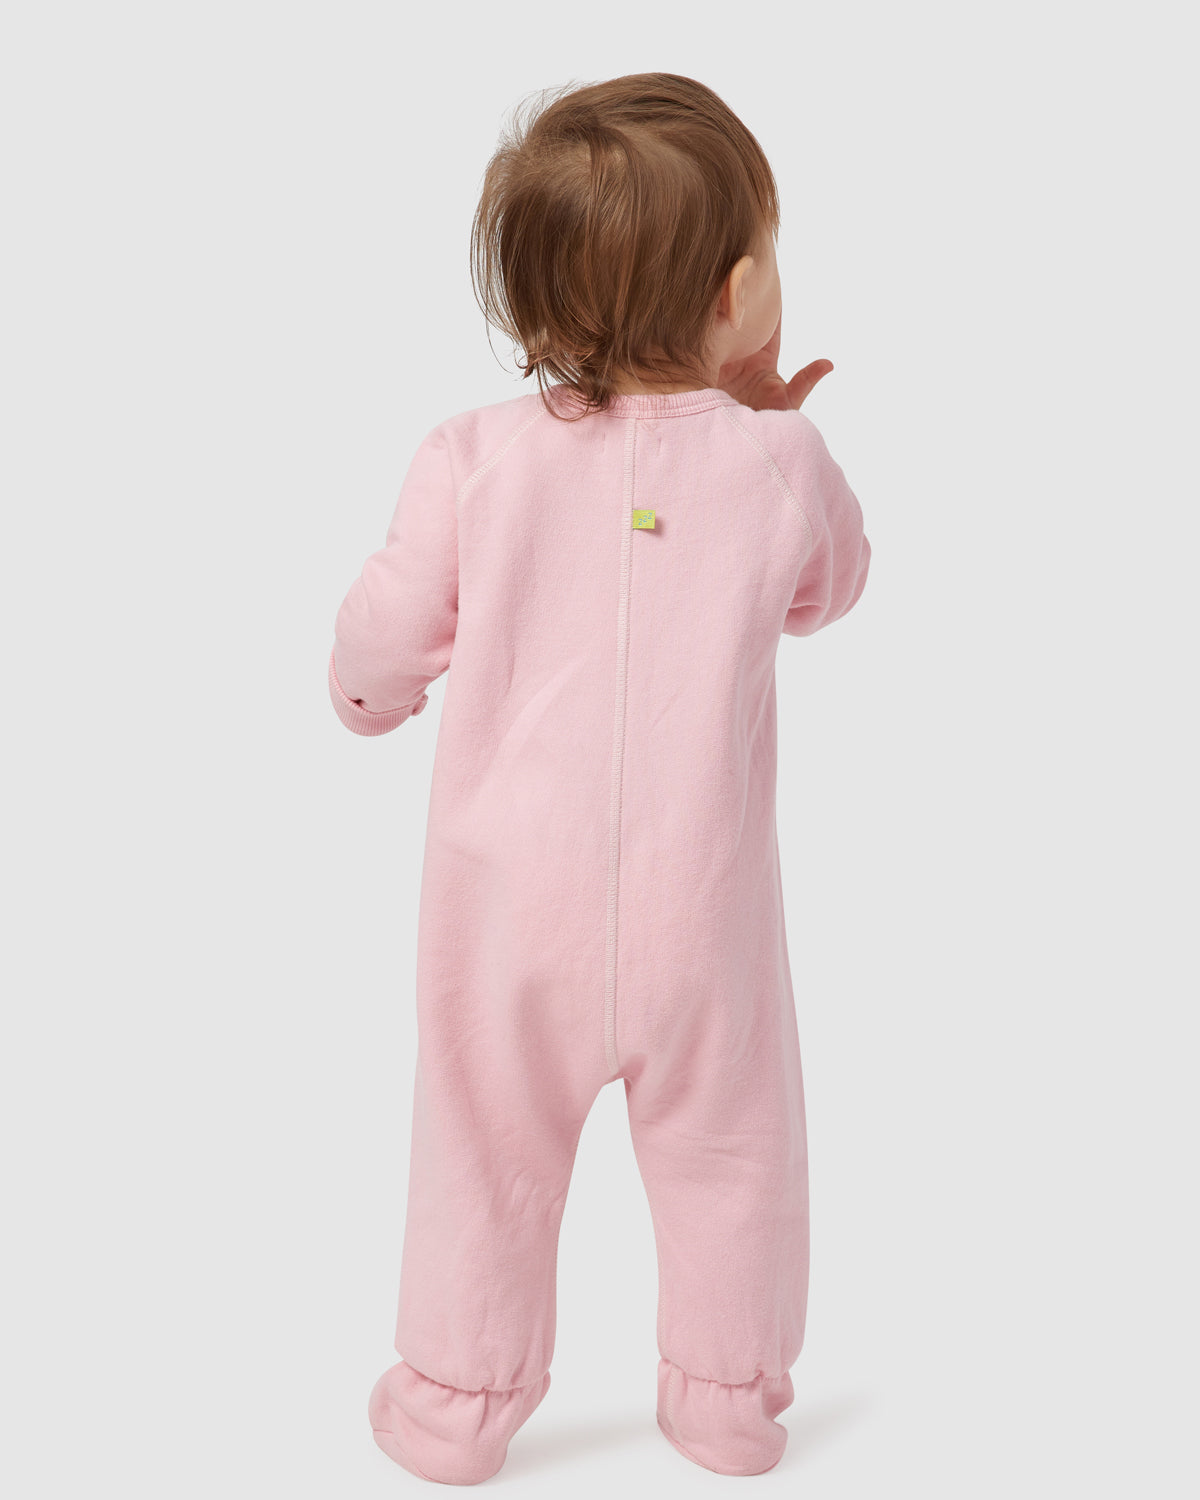 Levi Sweatsuit in Candy Pink By Morgan Lane